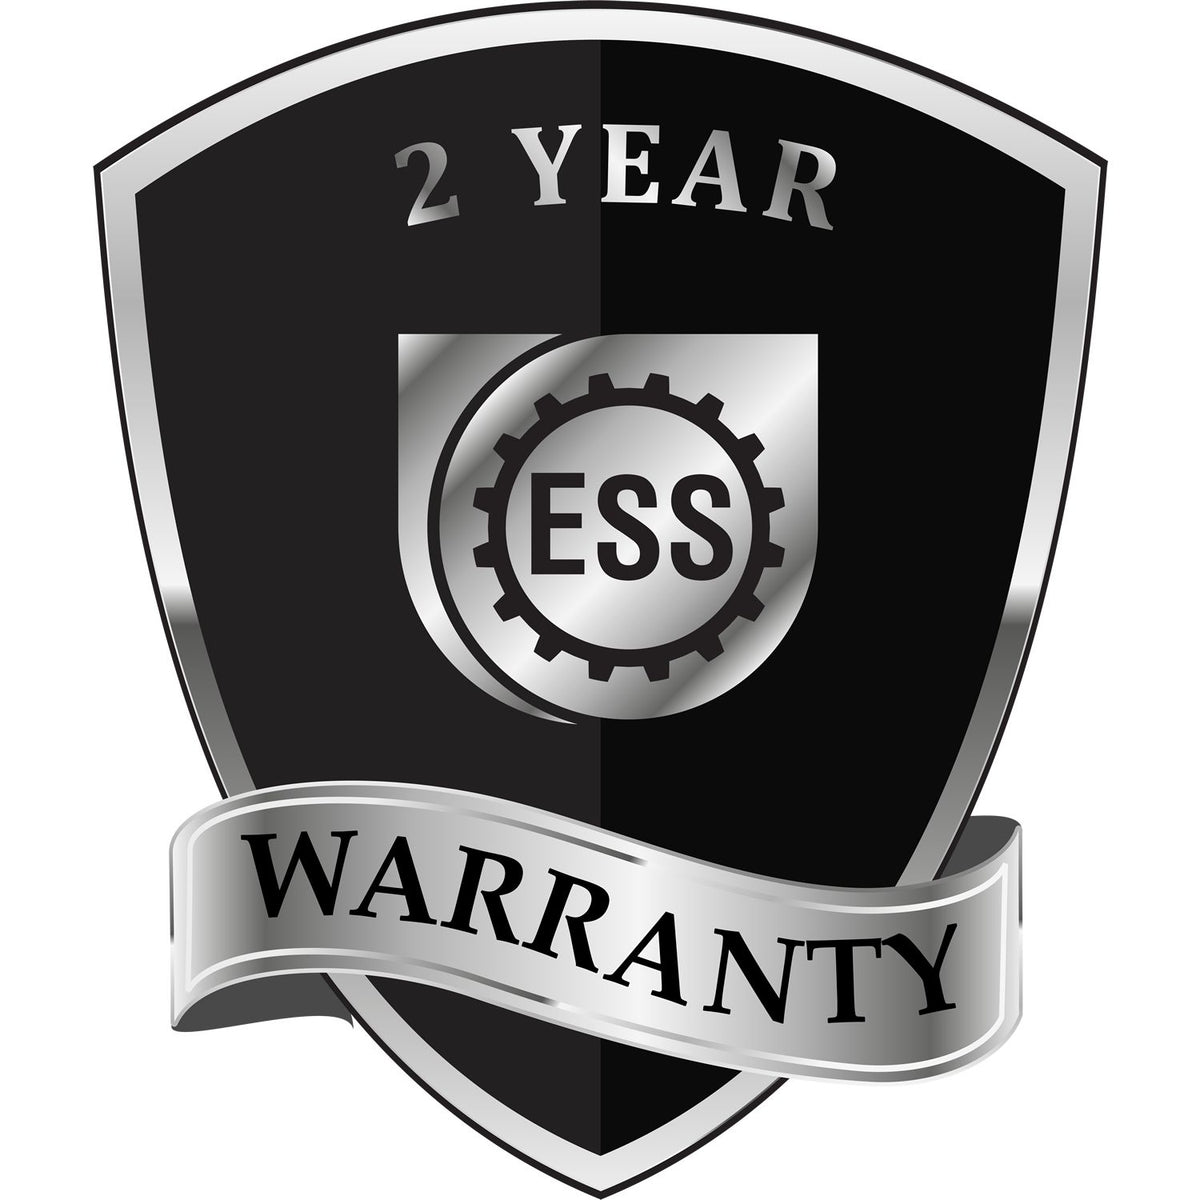 A black and silver badge or emblem showing warranty information for the Gift Nevada Land Surveyor Seal